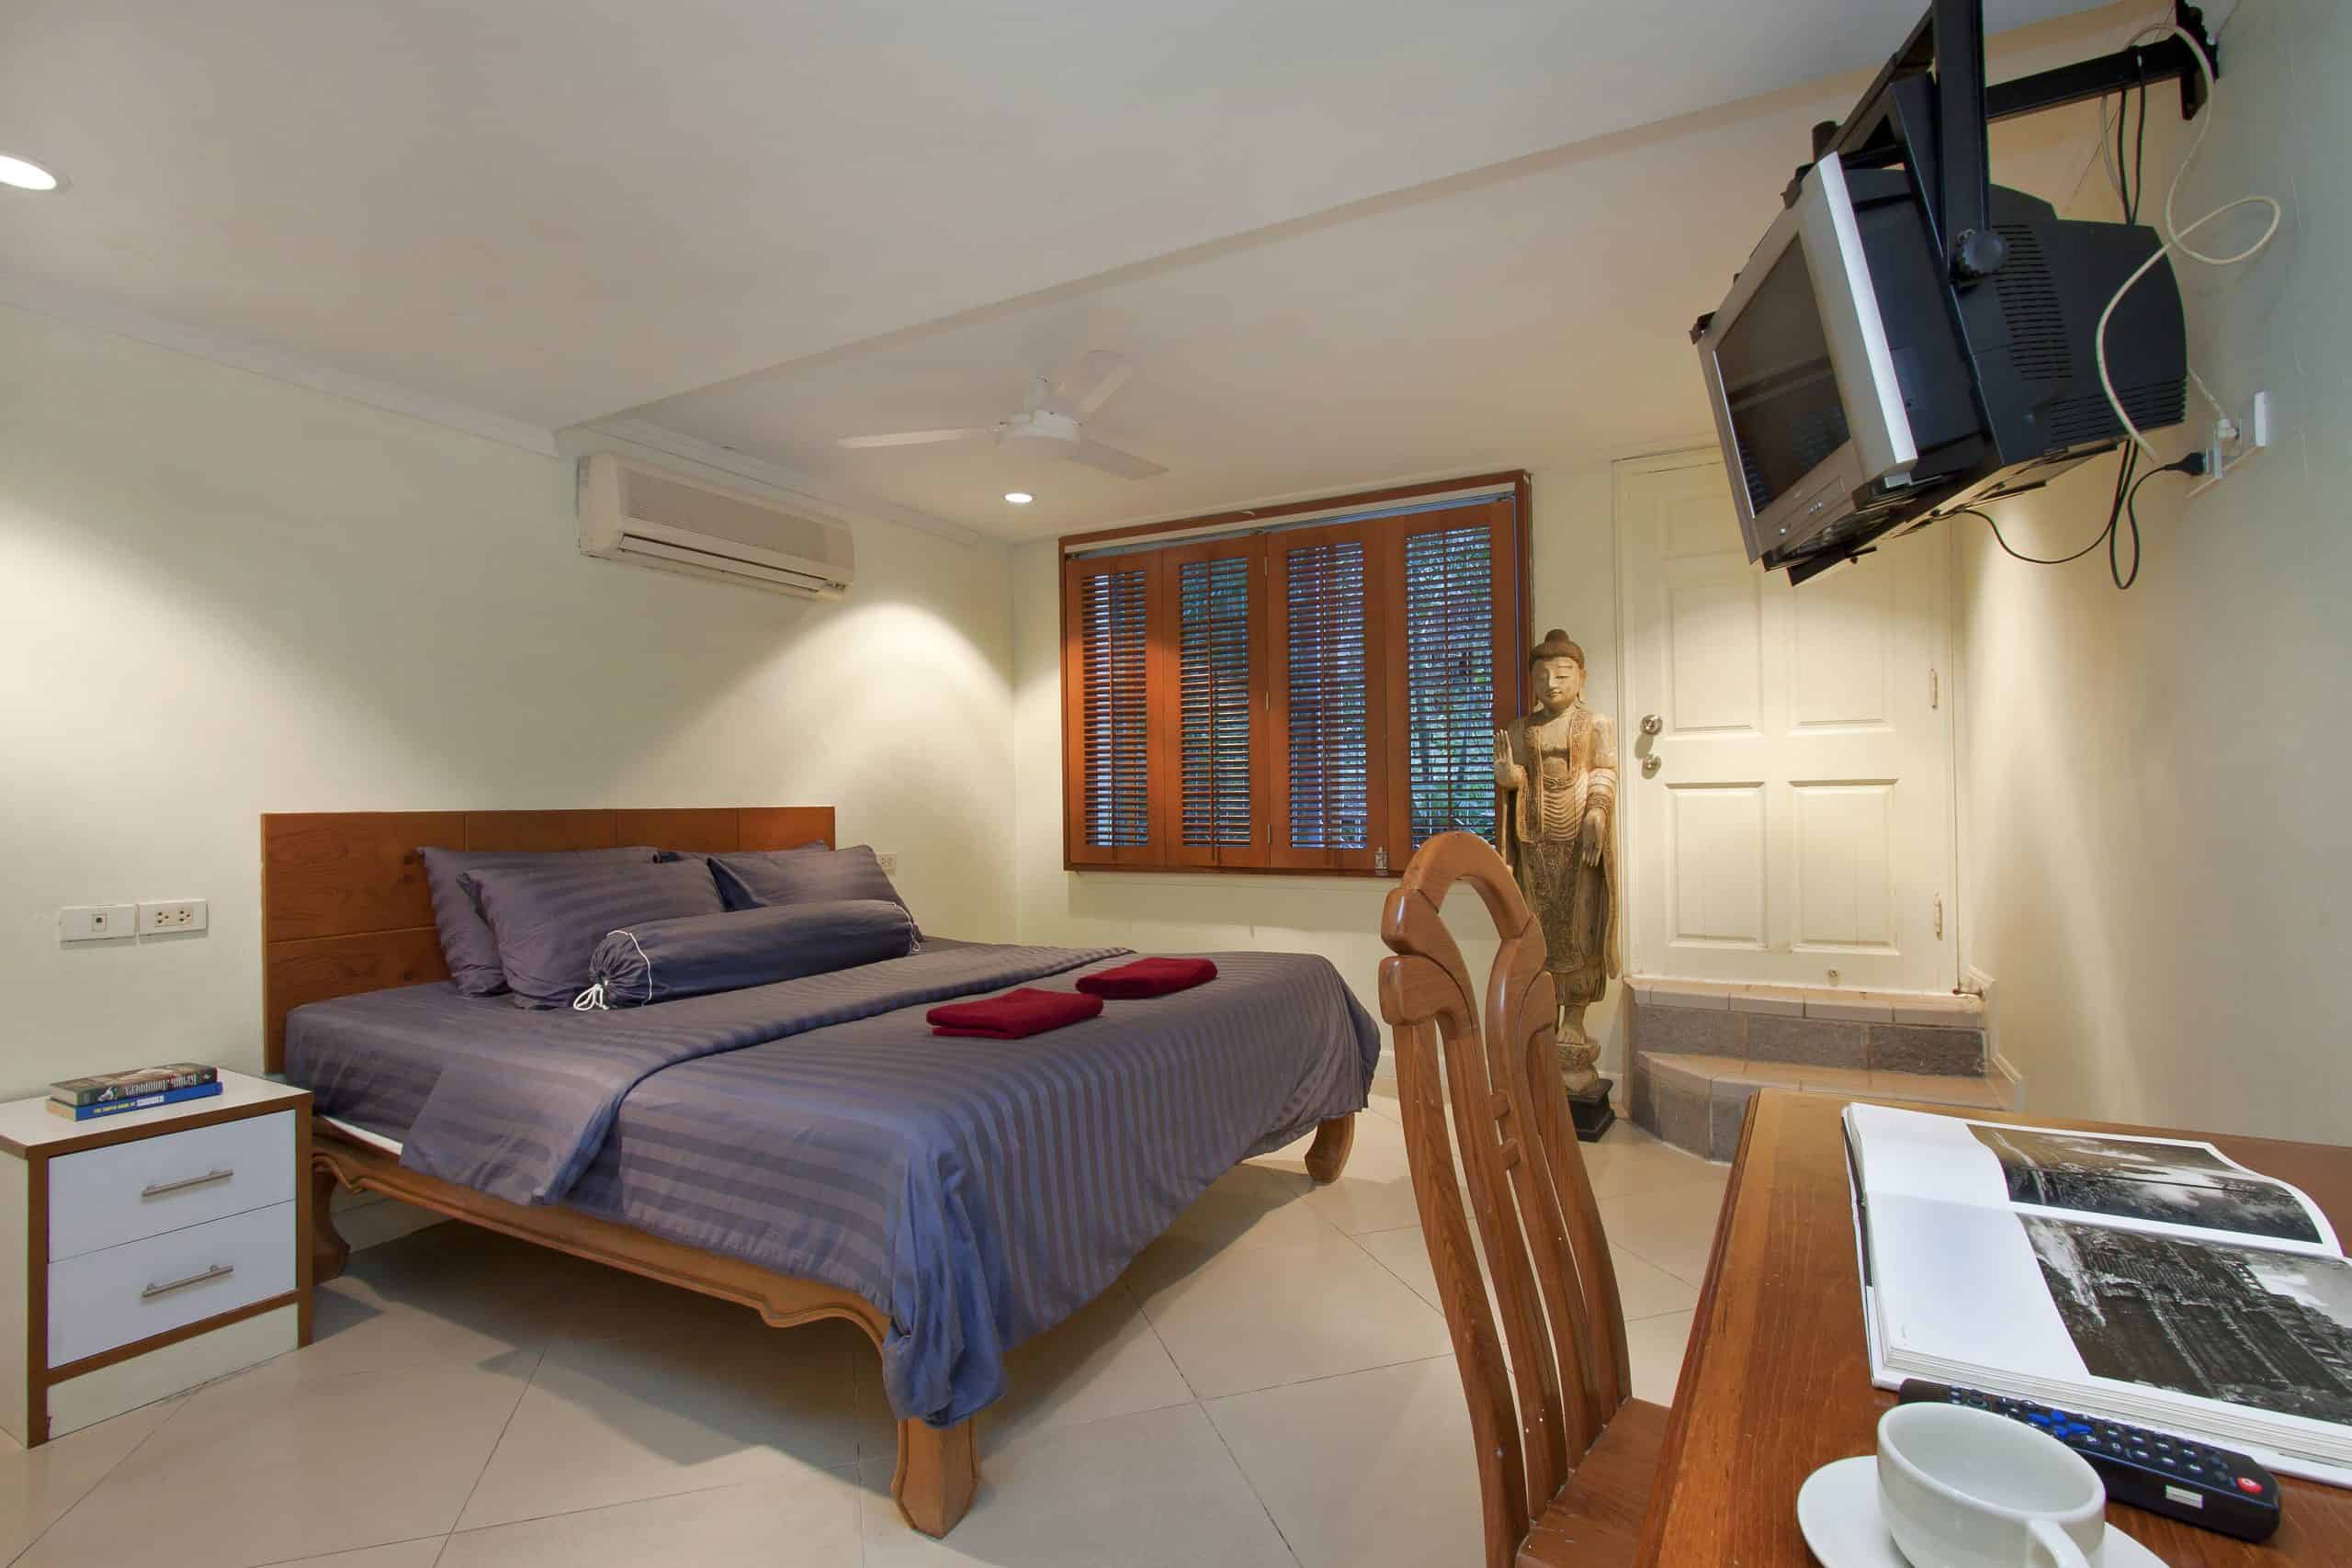 Cozy studio apartment in Pattaya with compact design for efficient use of space. Includes a comfortable bed, kitchenette, private shower, air conditioning, Wi-Fi, and access to building's swimming pool. Ideal for business or leisure travelers seeking affordable comfort